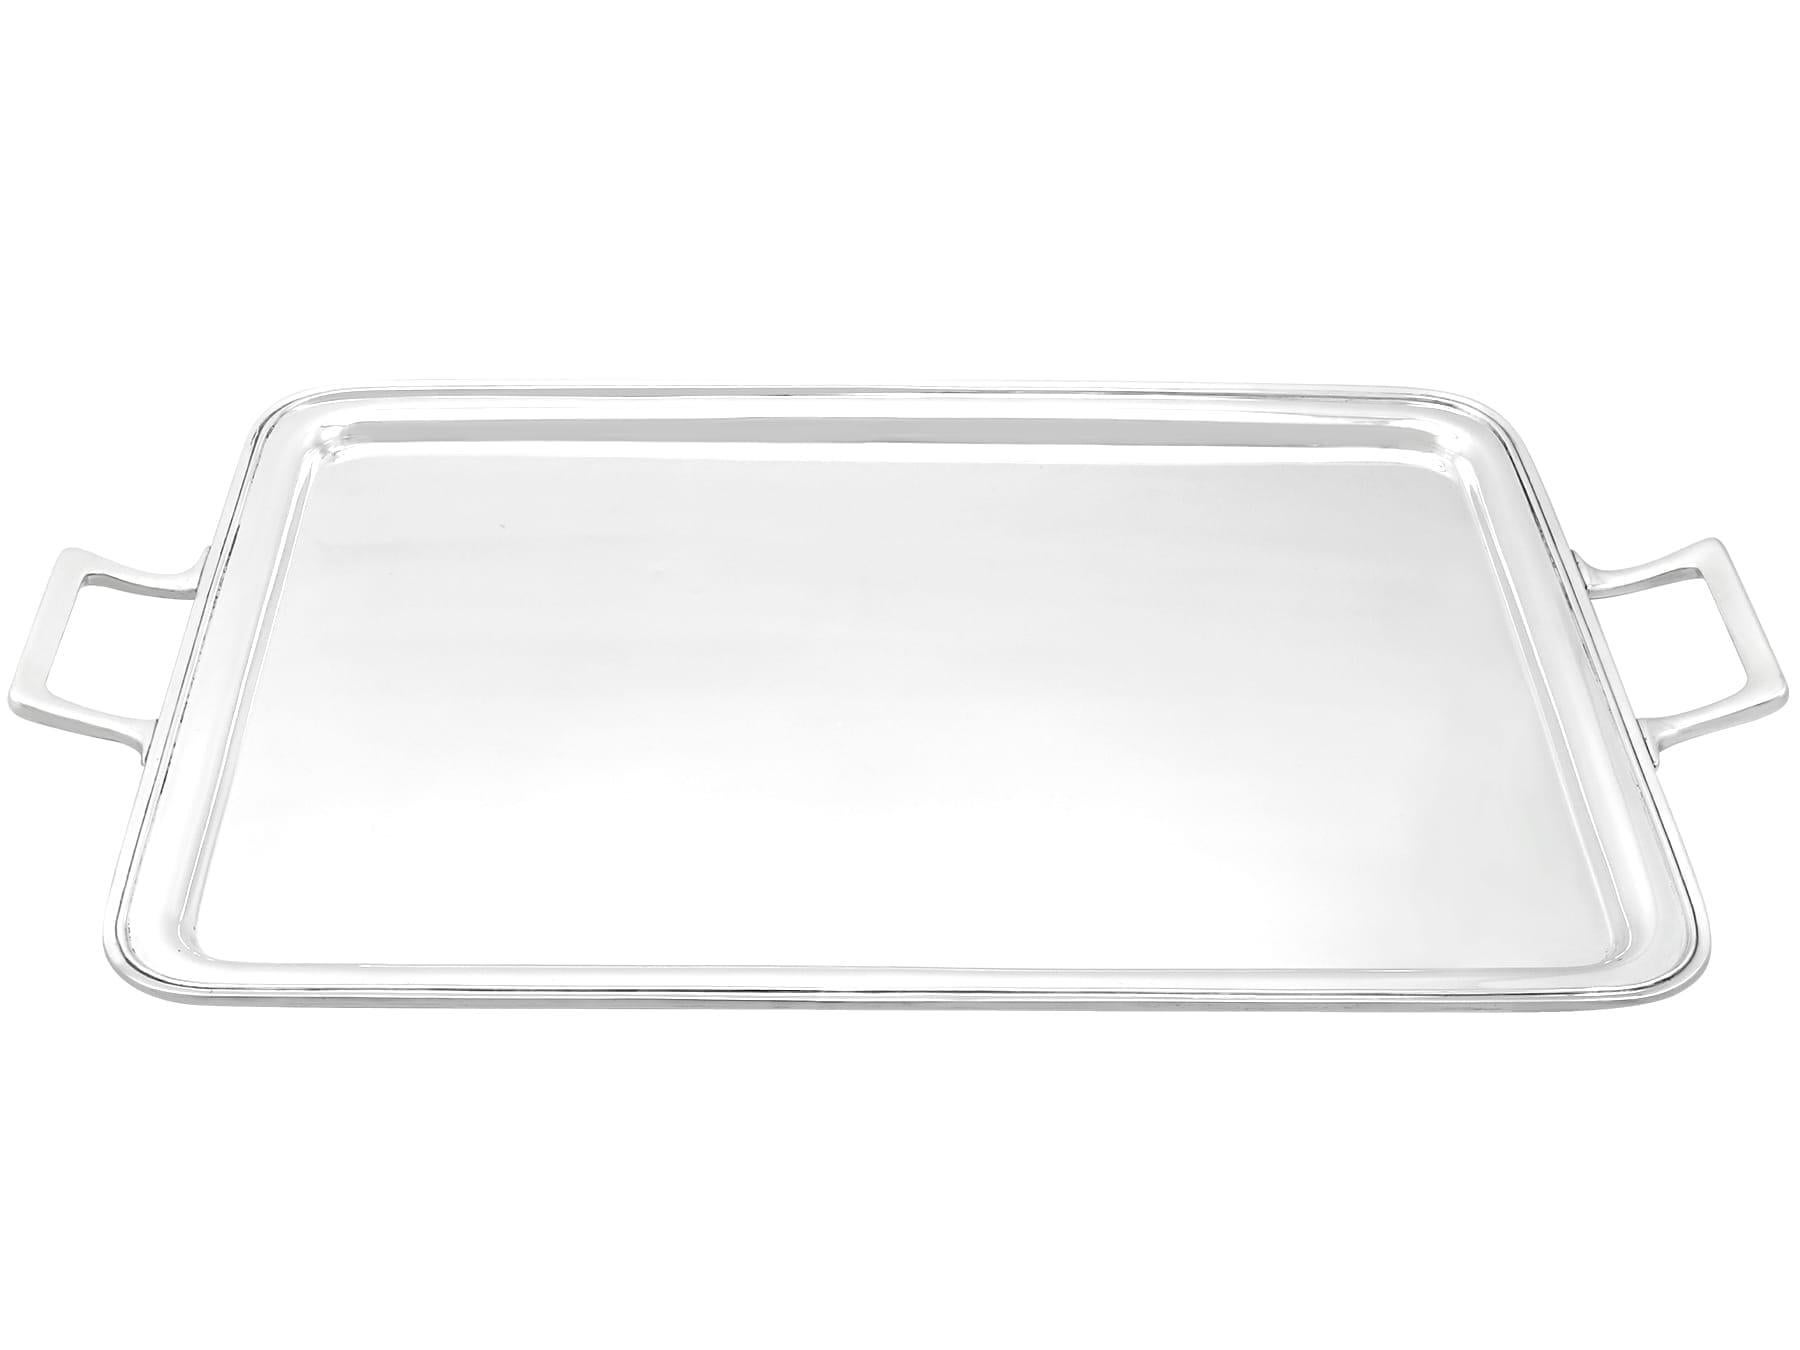 An exceptional, fine and impressive antique George VI English sterling silver two-handled tray; an addition to our silver serveware collection.

This exceptional antique George VI sterling silver tray has a rectangular form with rounded corners.
The